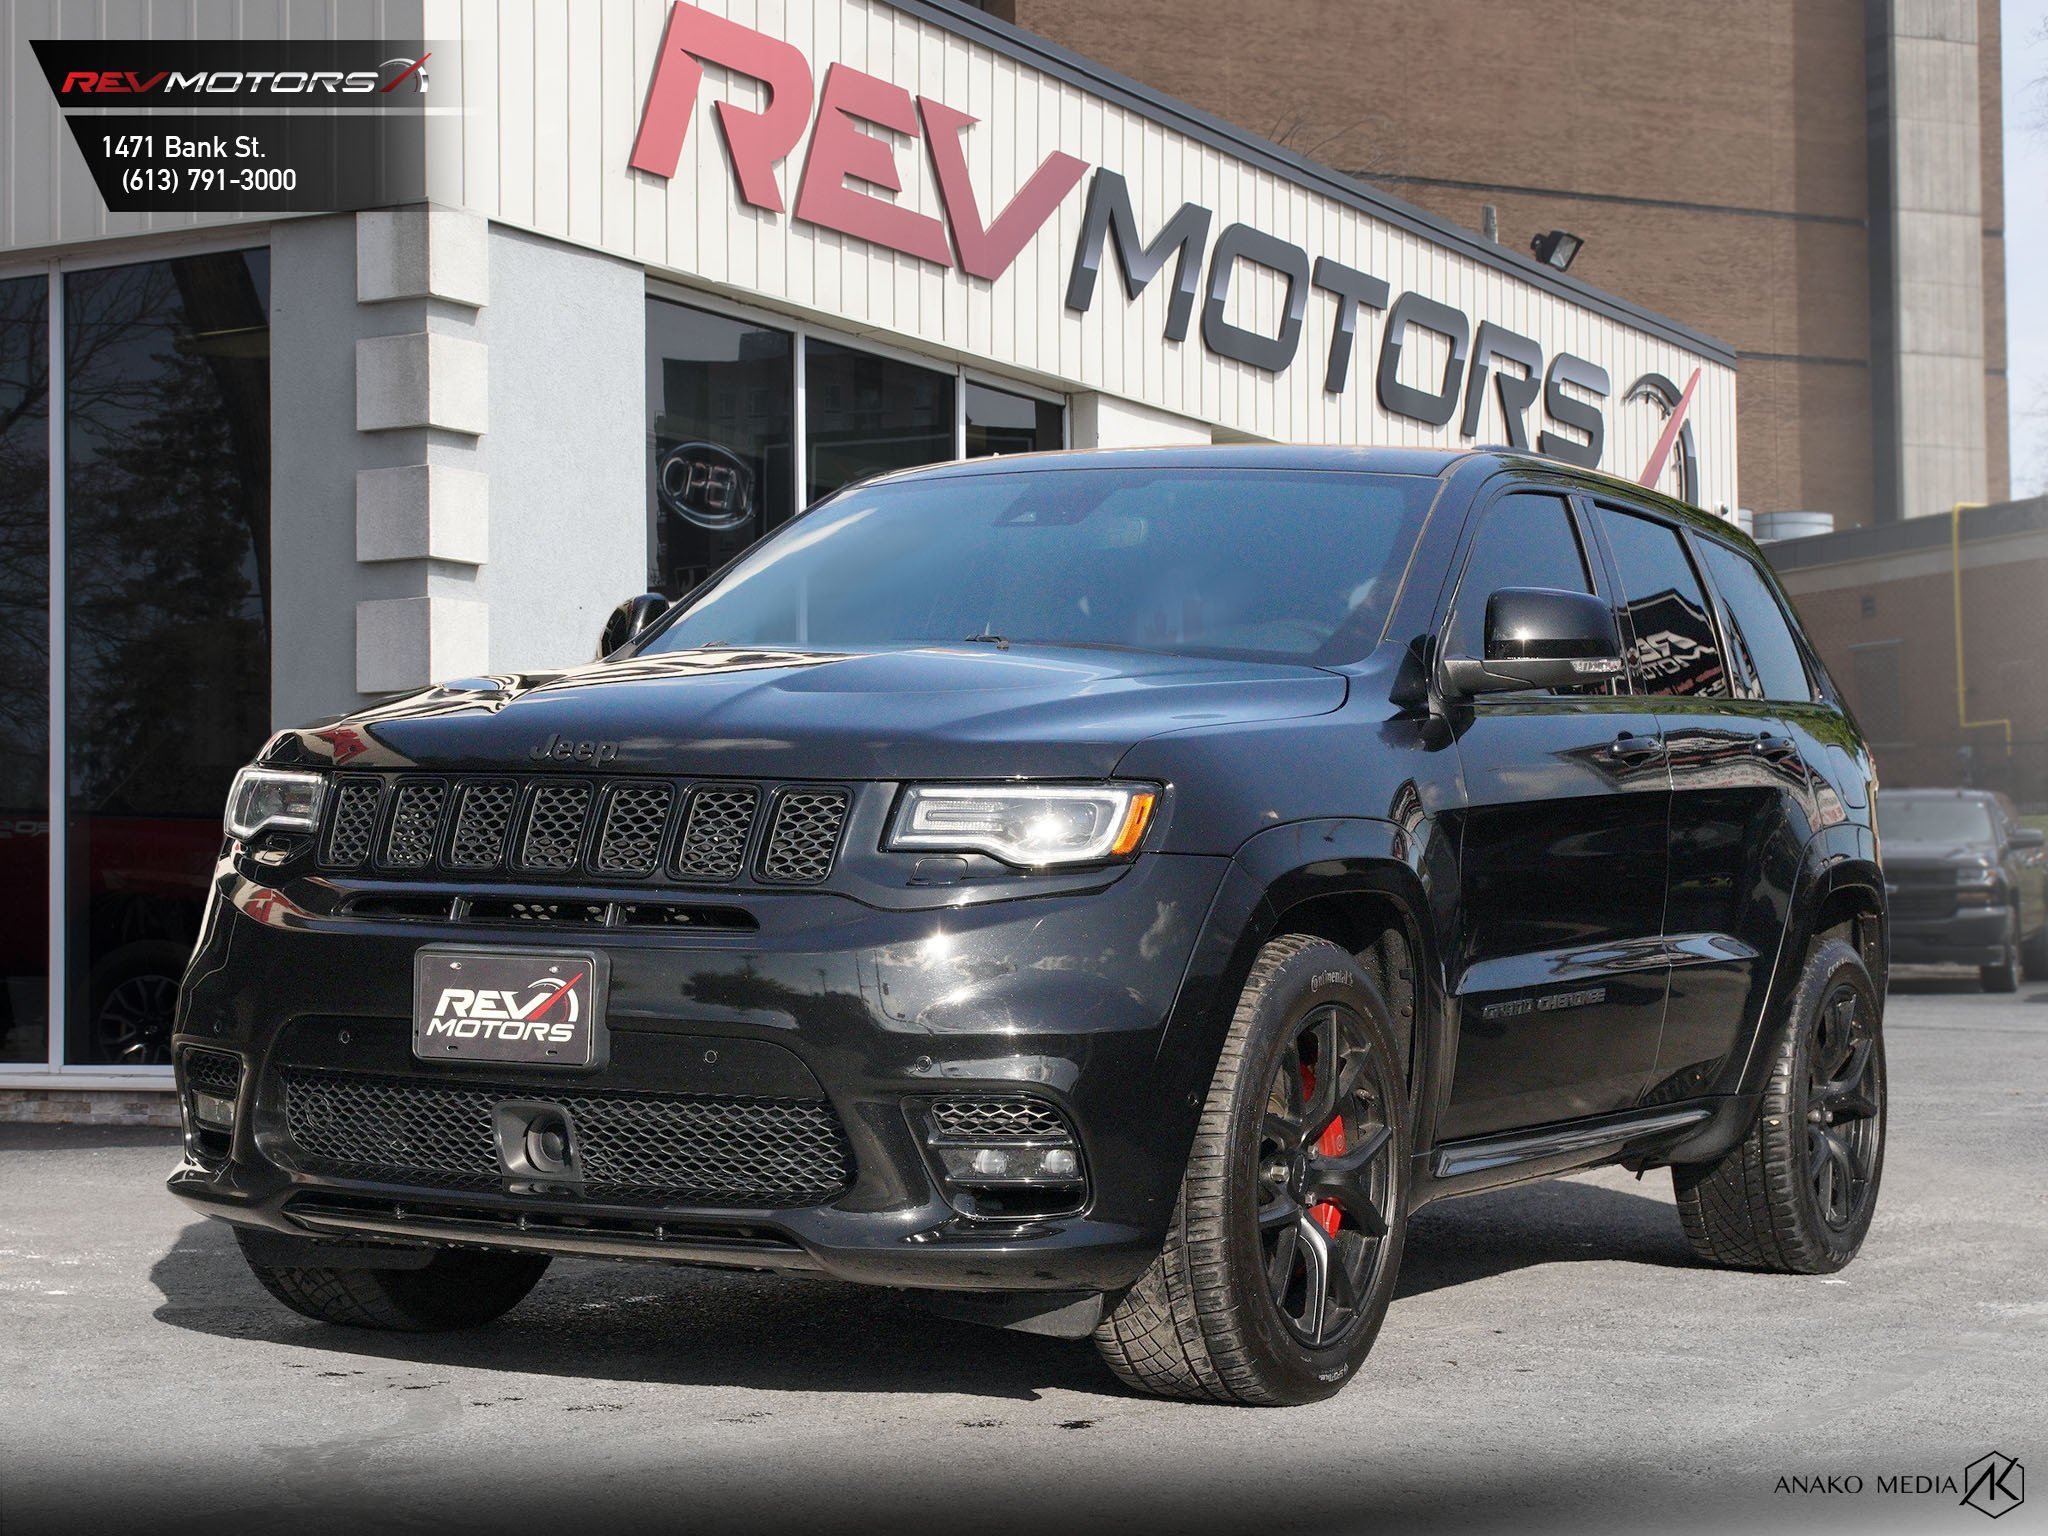 2020 Jeep Grand Cherokee SRT | 475HP | No Accidents 